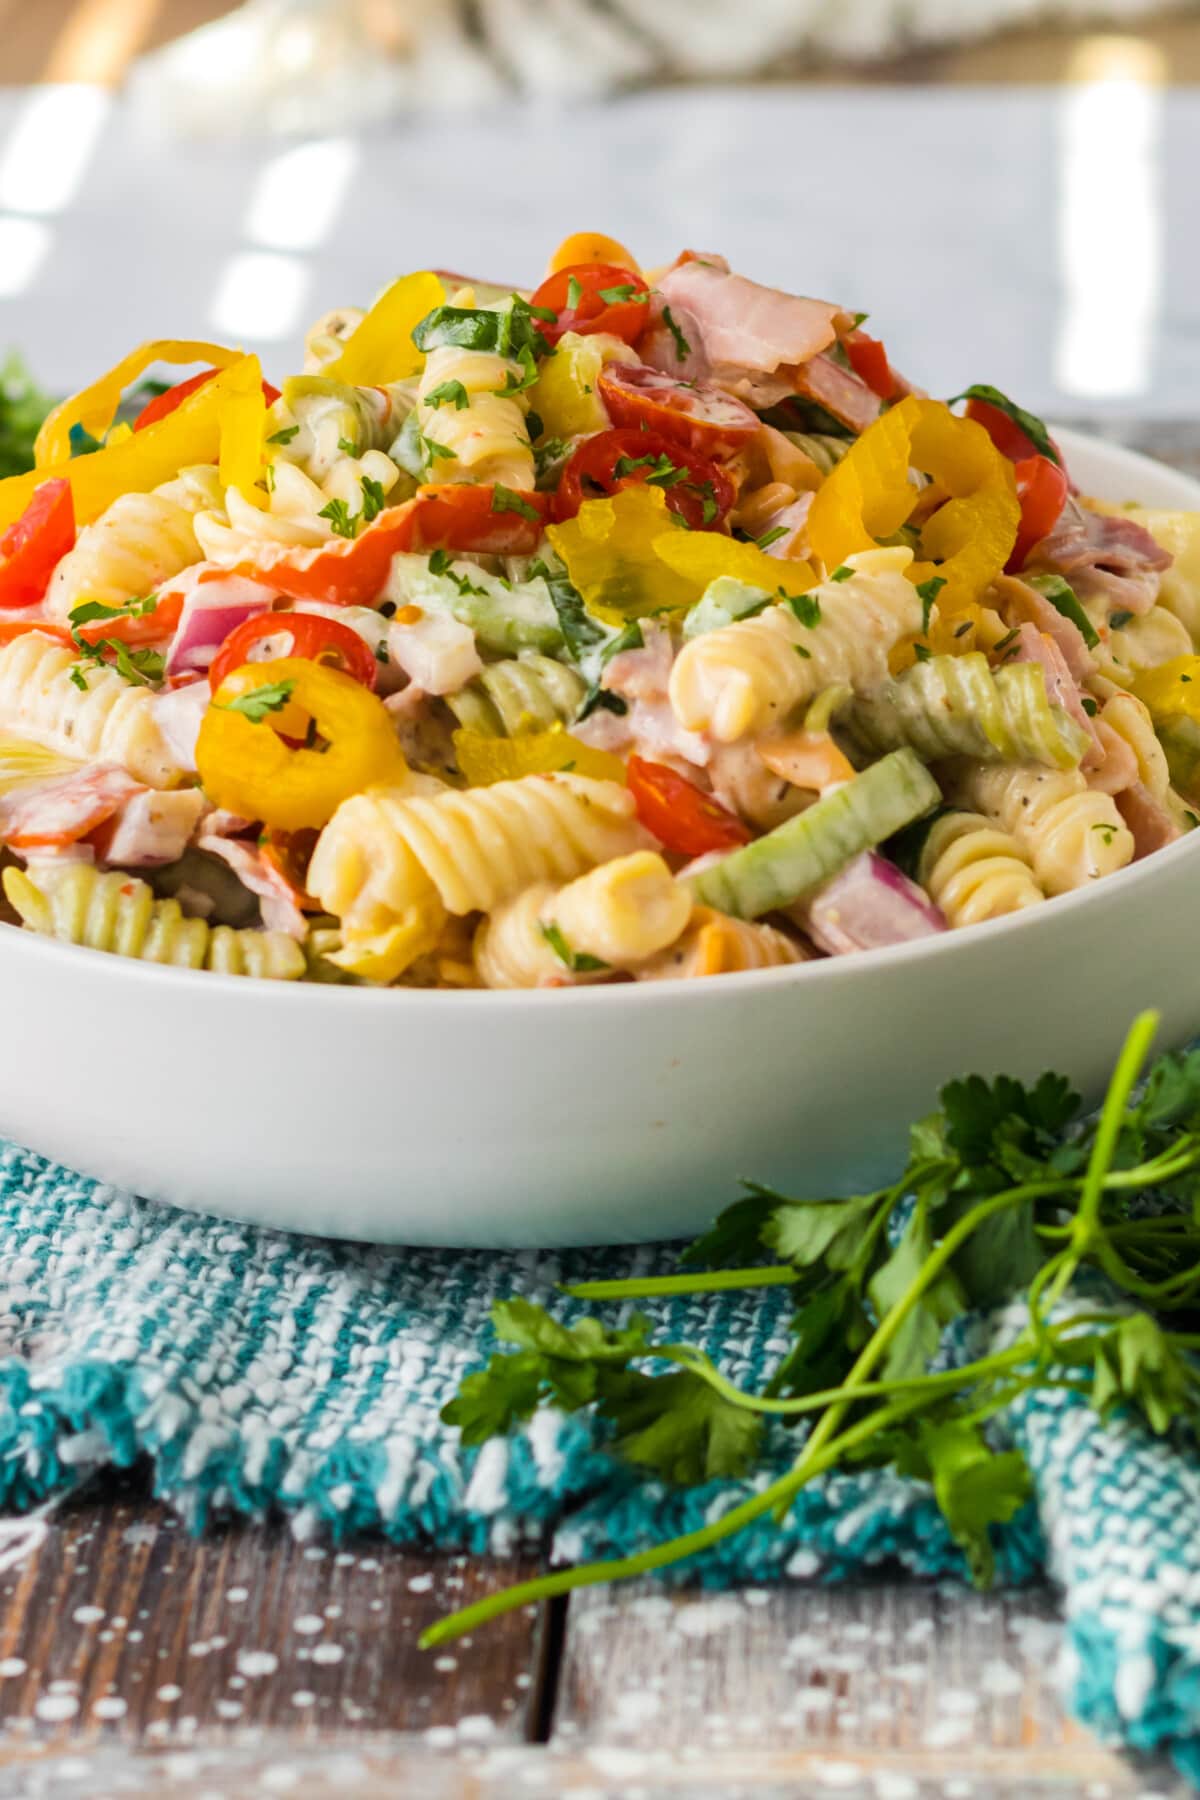 Italian sub pasta salad in a white bowl, side view